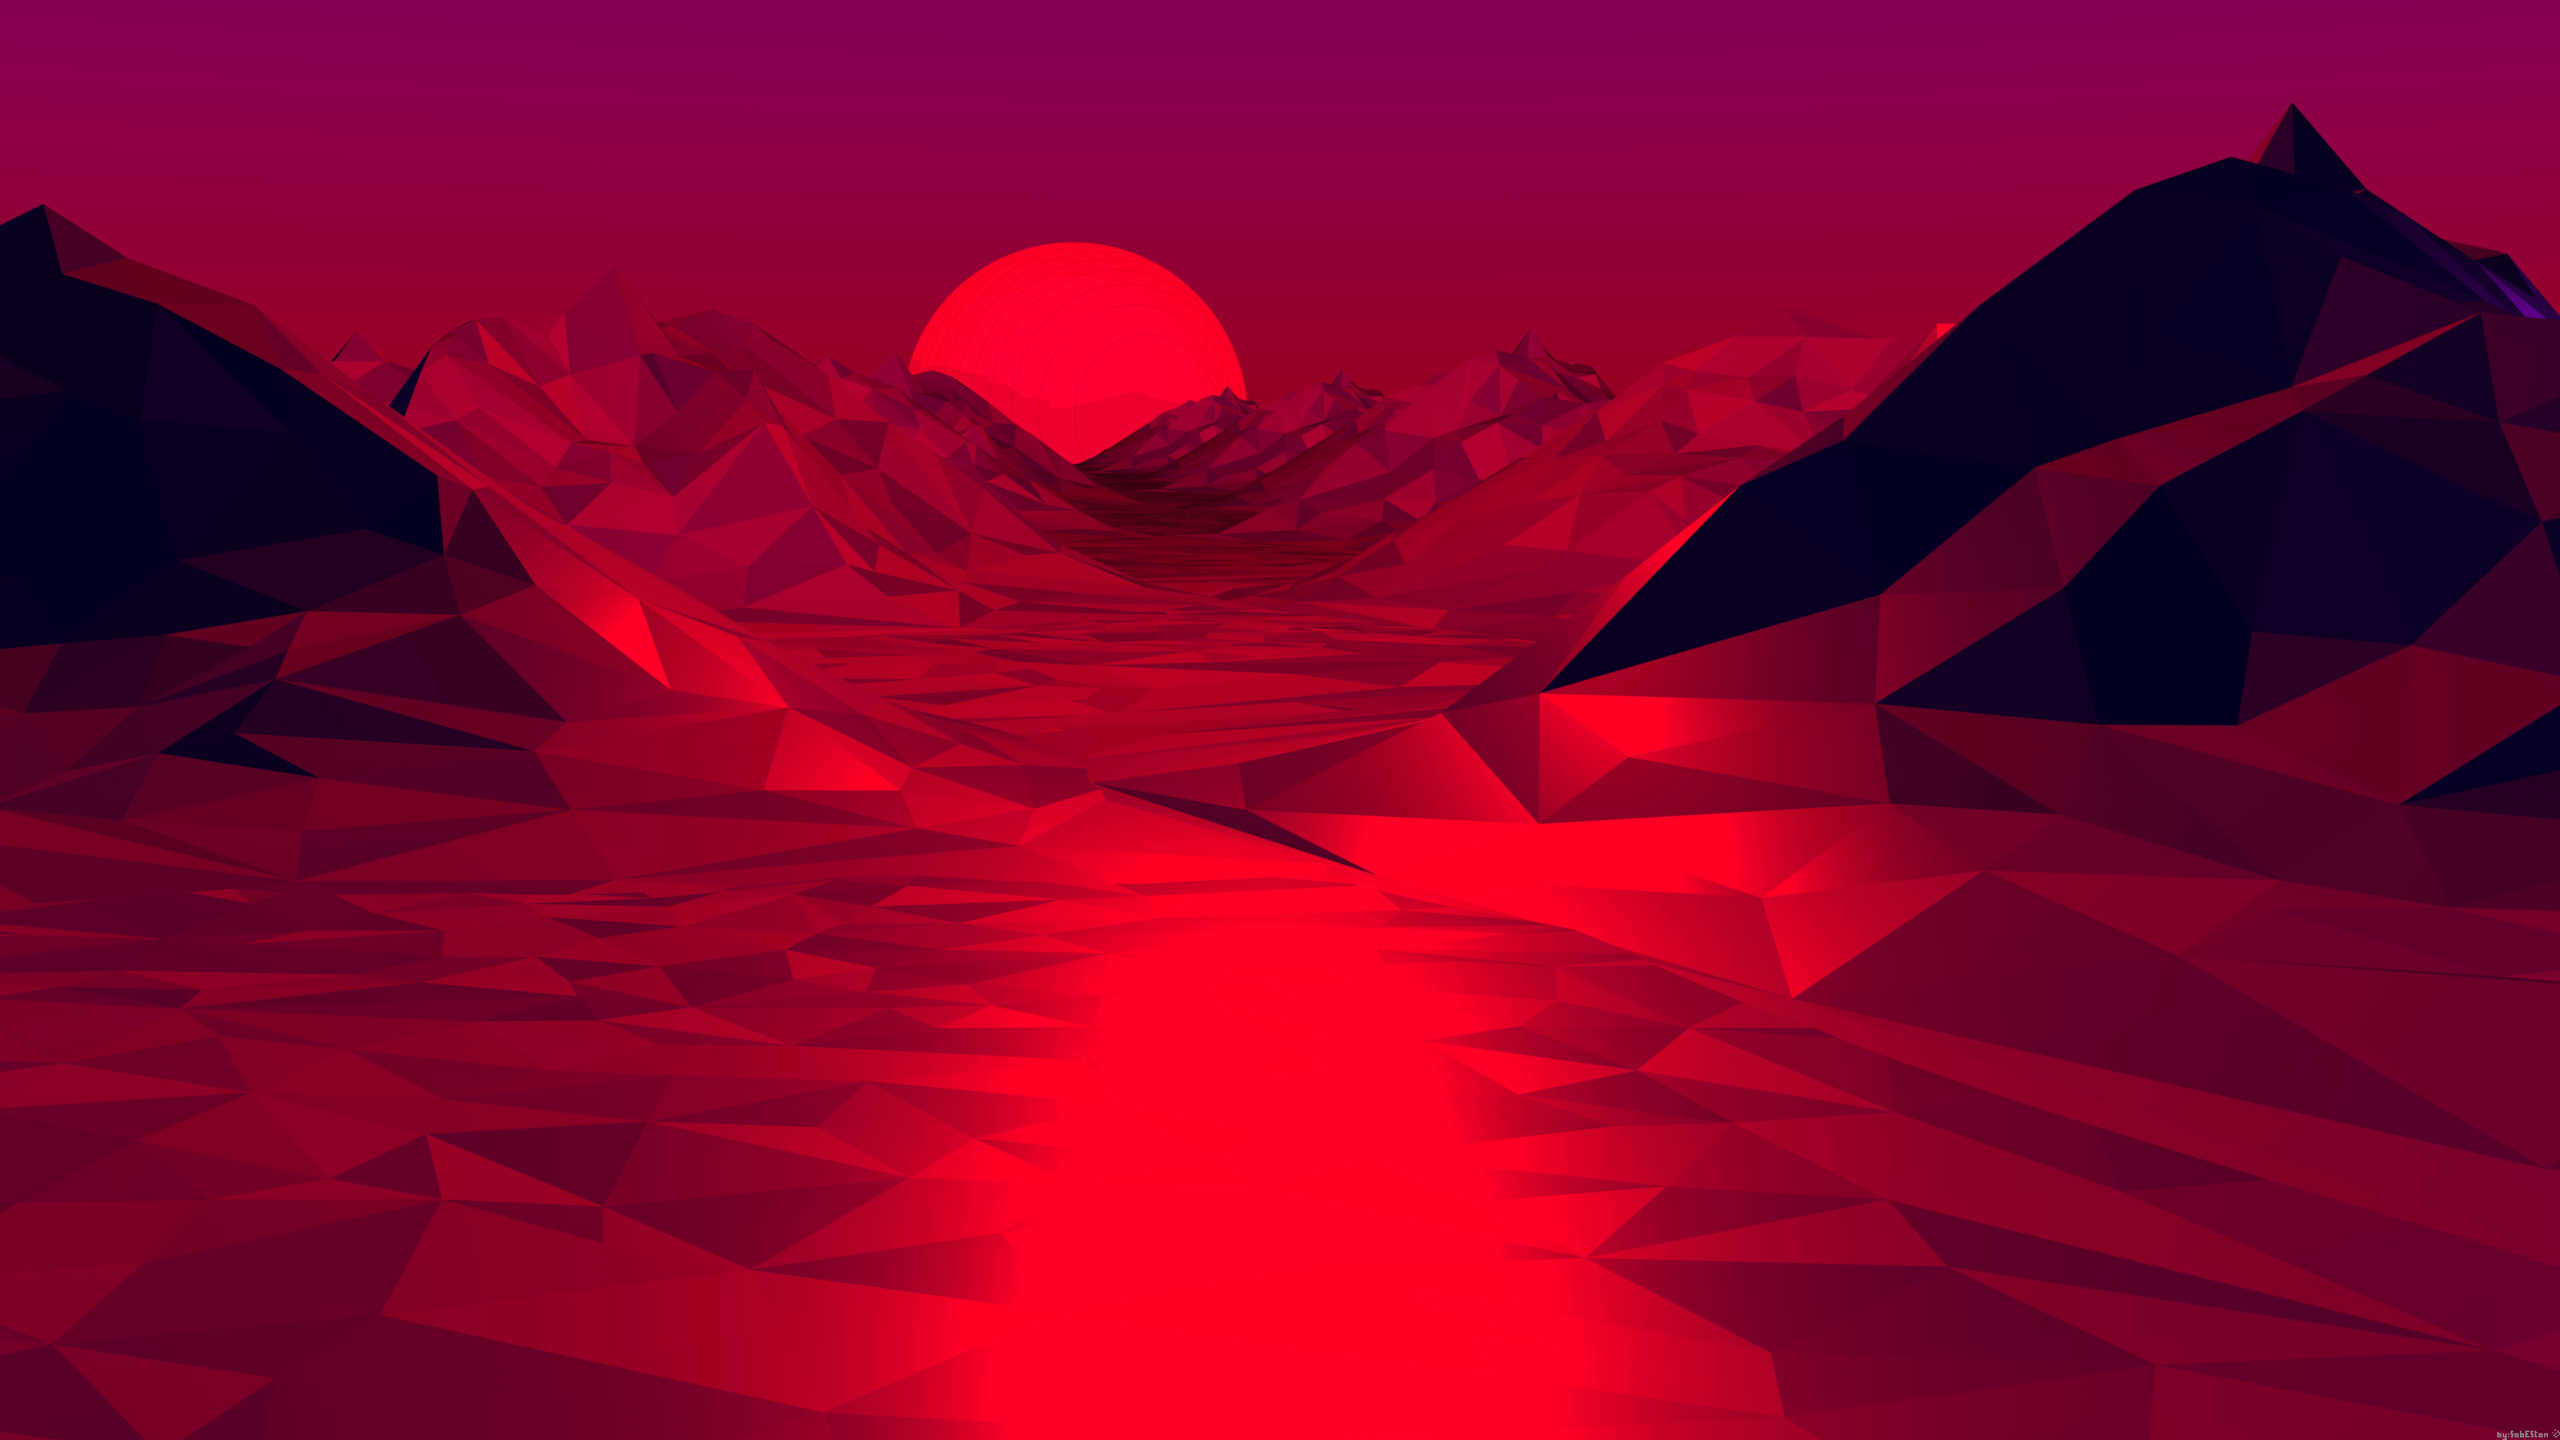 A red sunset over mountains and water - Bright